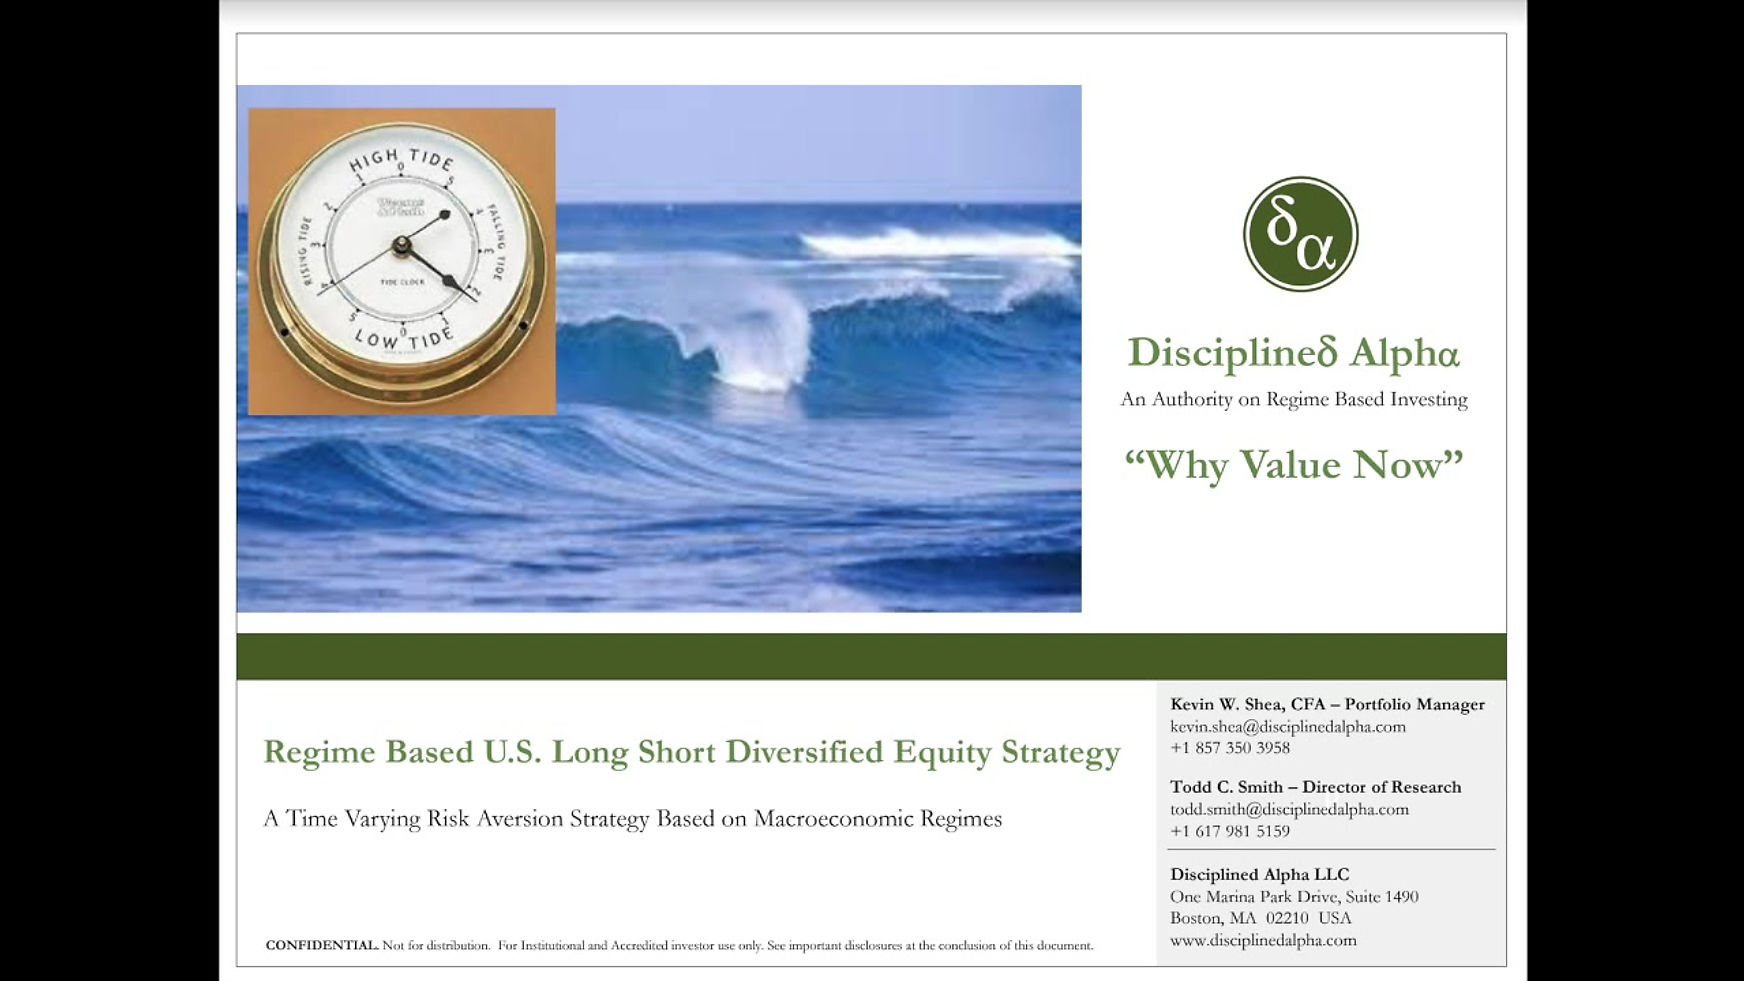 Disciplined Alpha: Why Value Now (July 2020)